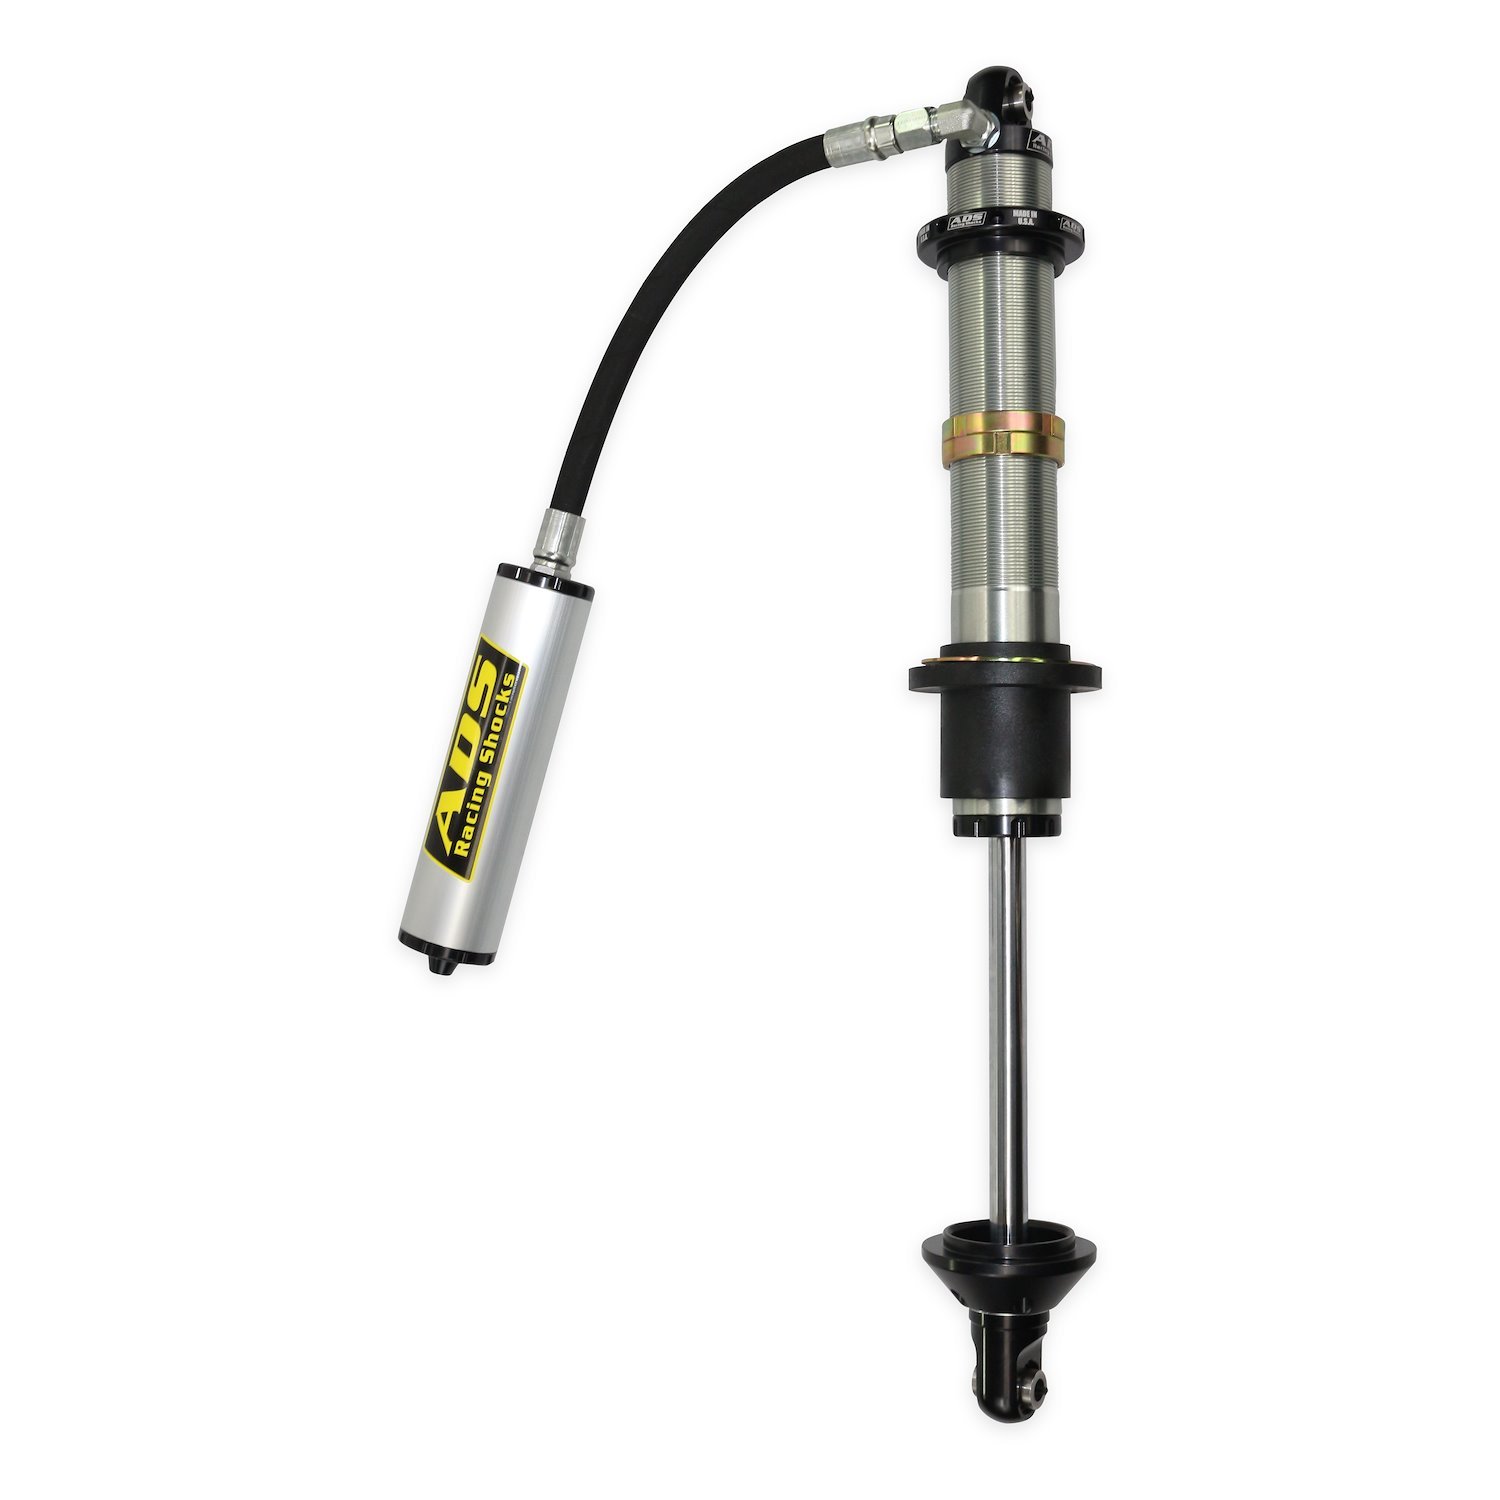 250-COR08-A90 Coil-Over Race Shock, 2.5 in. x 8 in. Stroke, w/ Remote Reservoir (90-Degree Hose), w/ Compression Adjustment